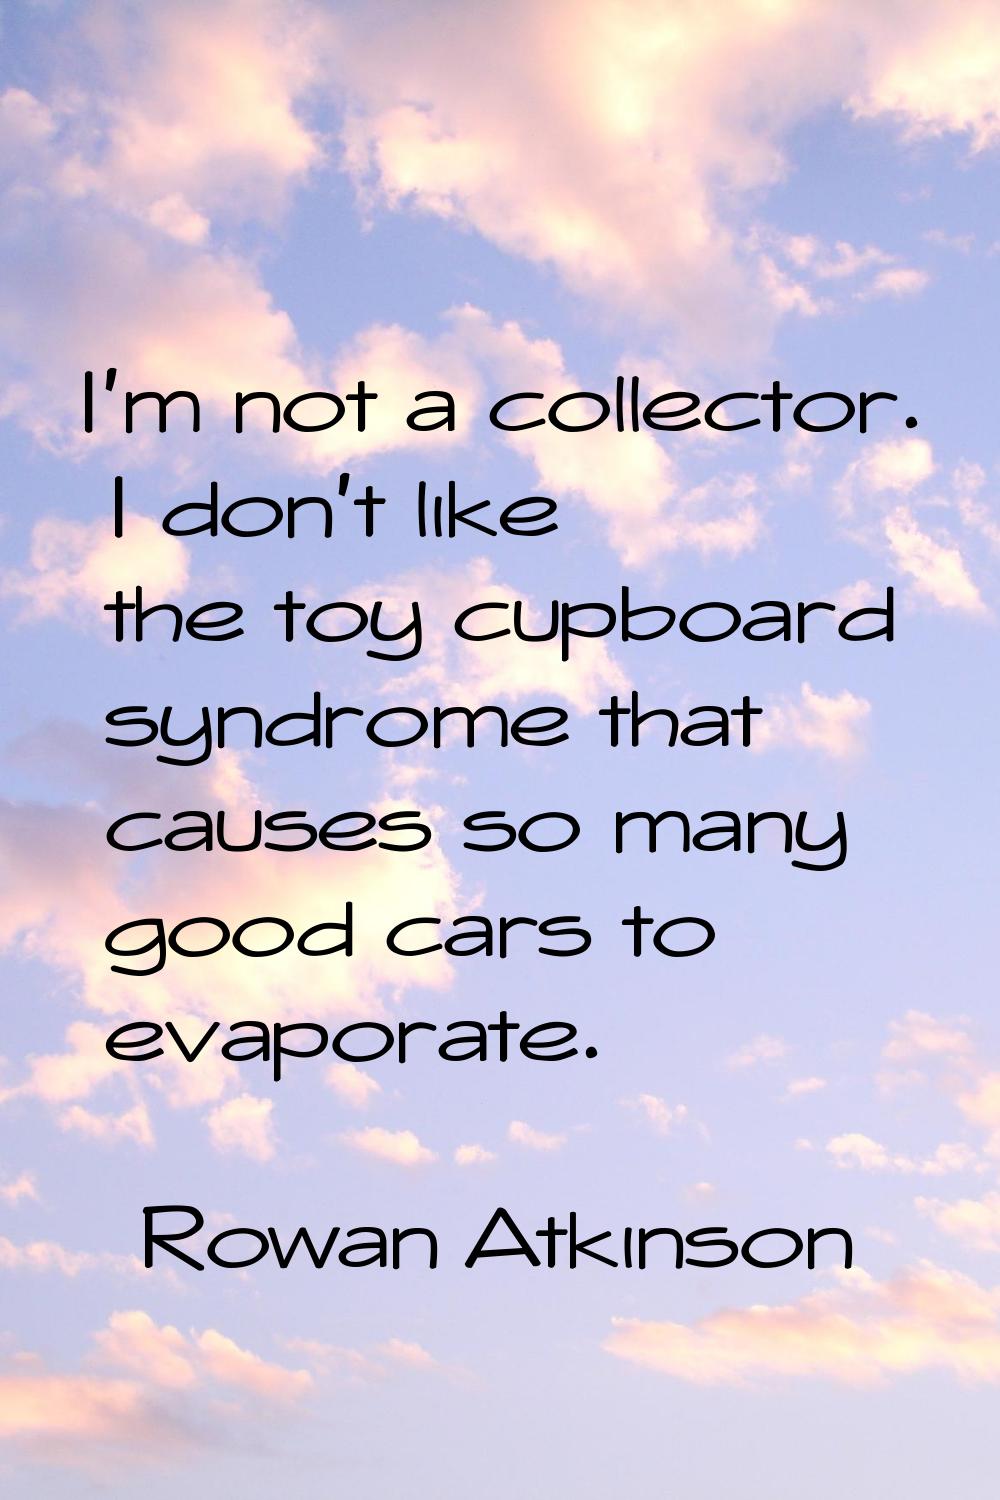 I'm not a collector. I don't like the toy cupboard syndrome that causes so many good cars to evapor